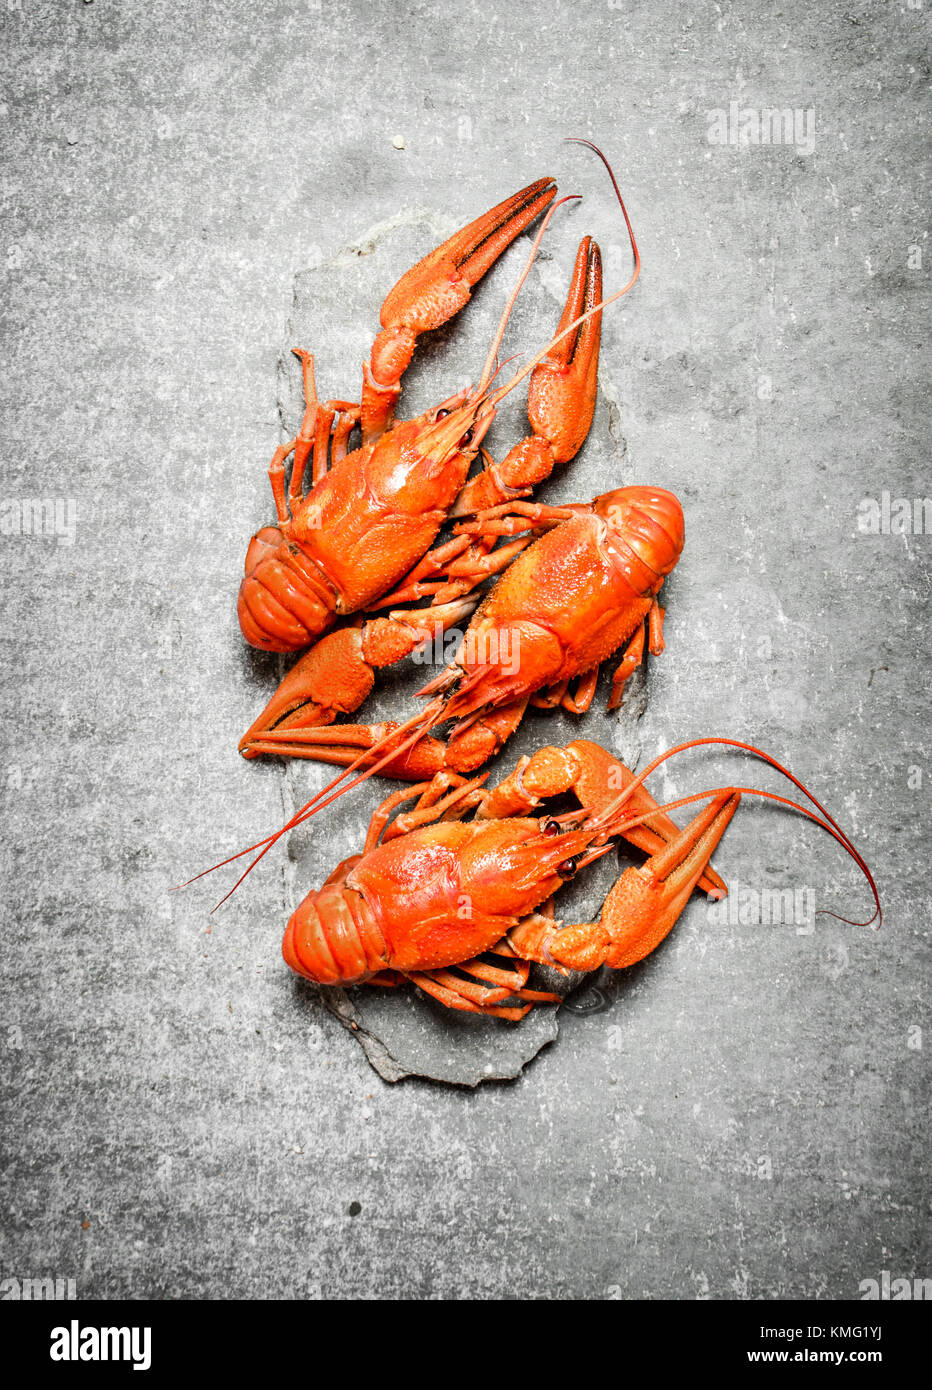 Flavorful boiled crawfish. On a stone background. Stock Photo